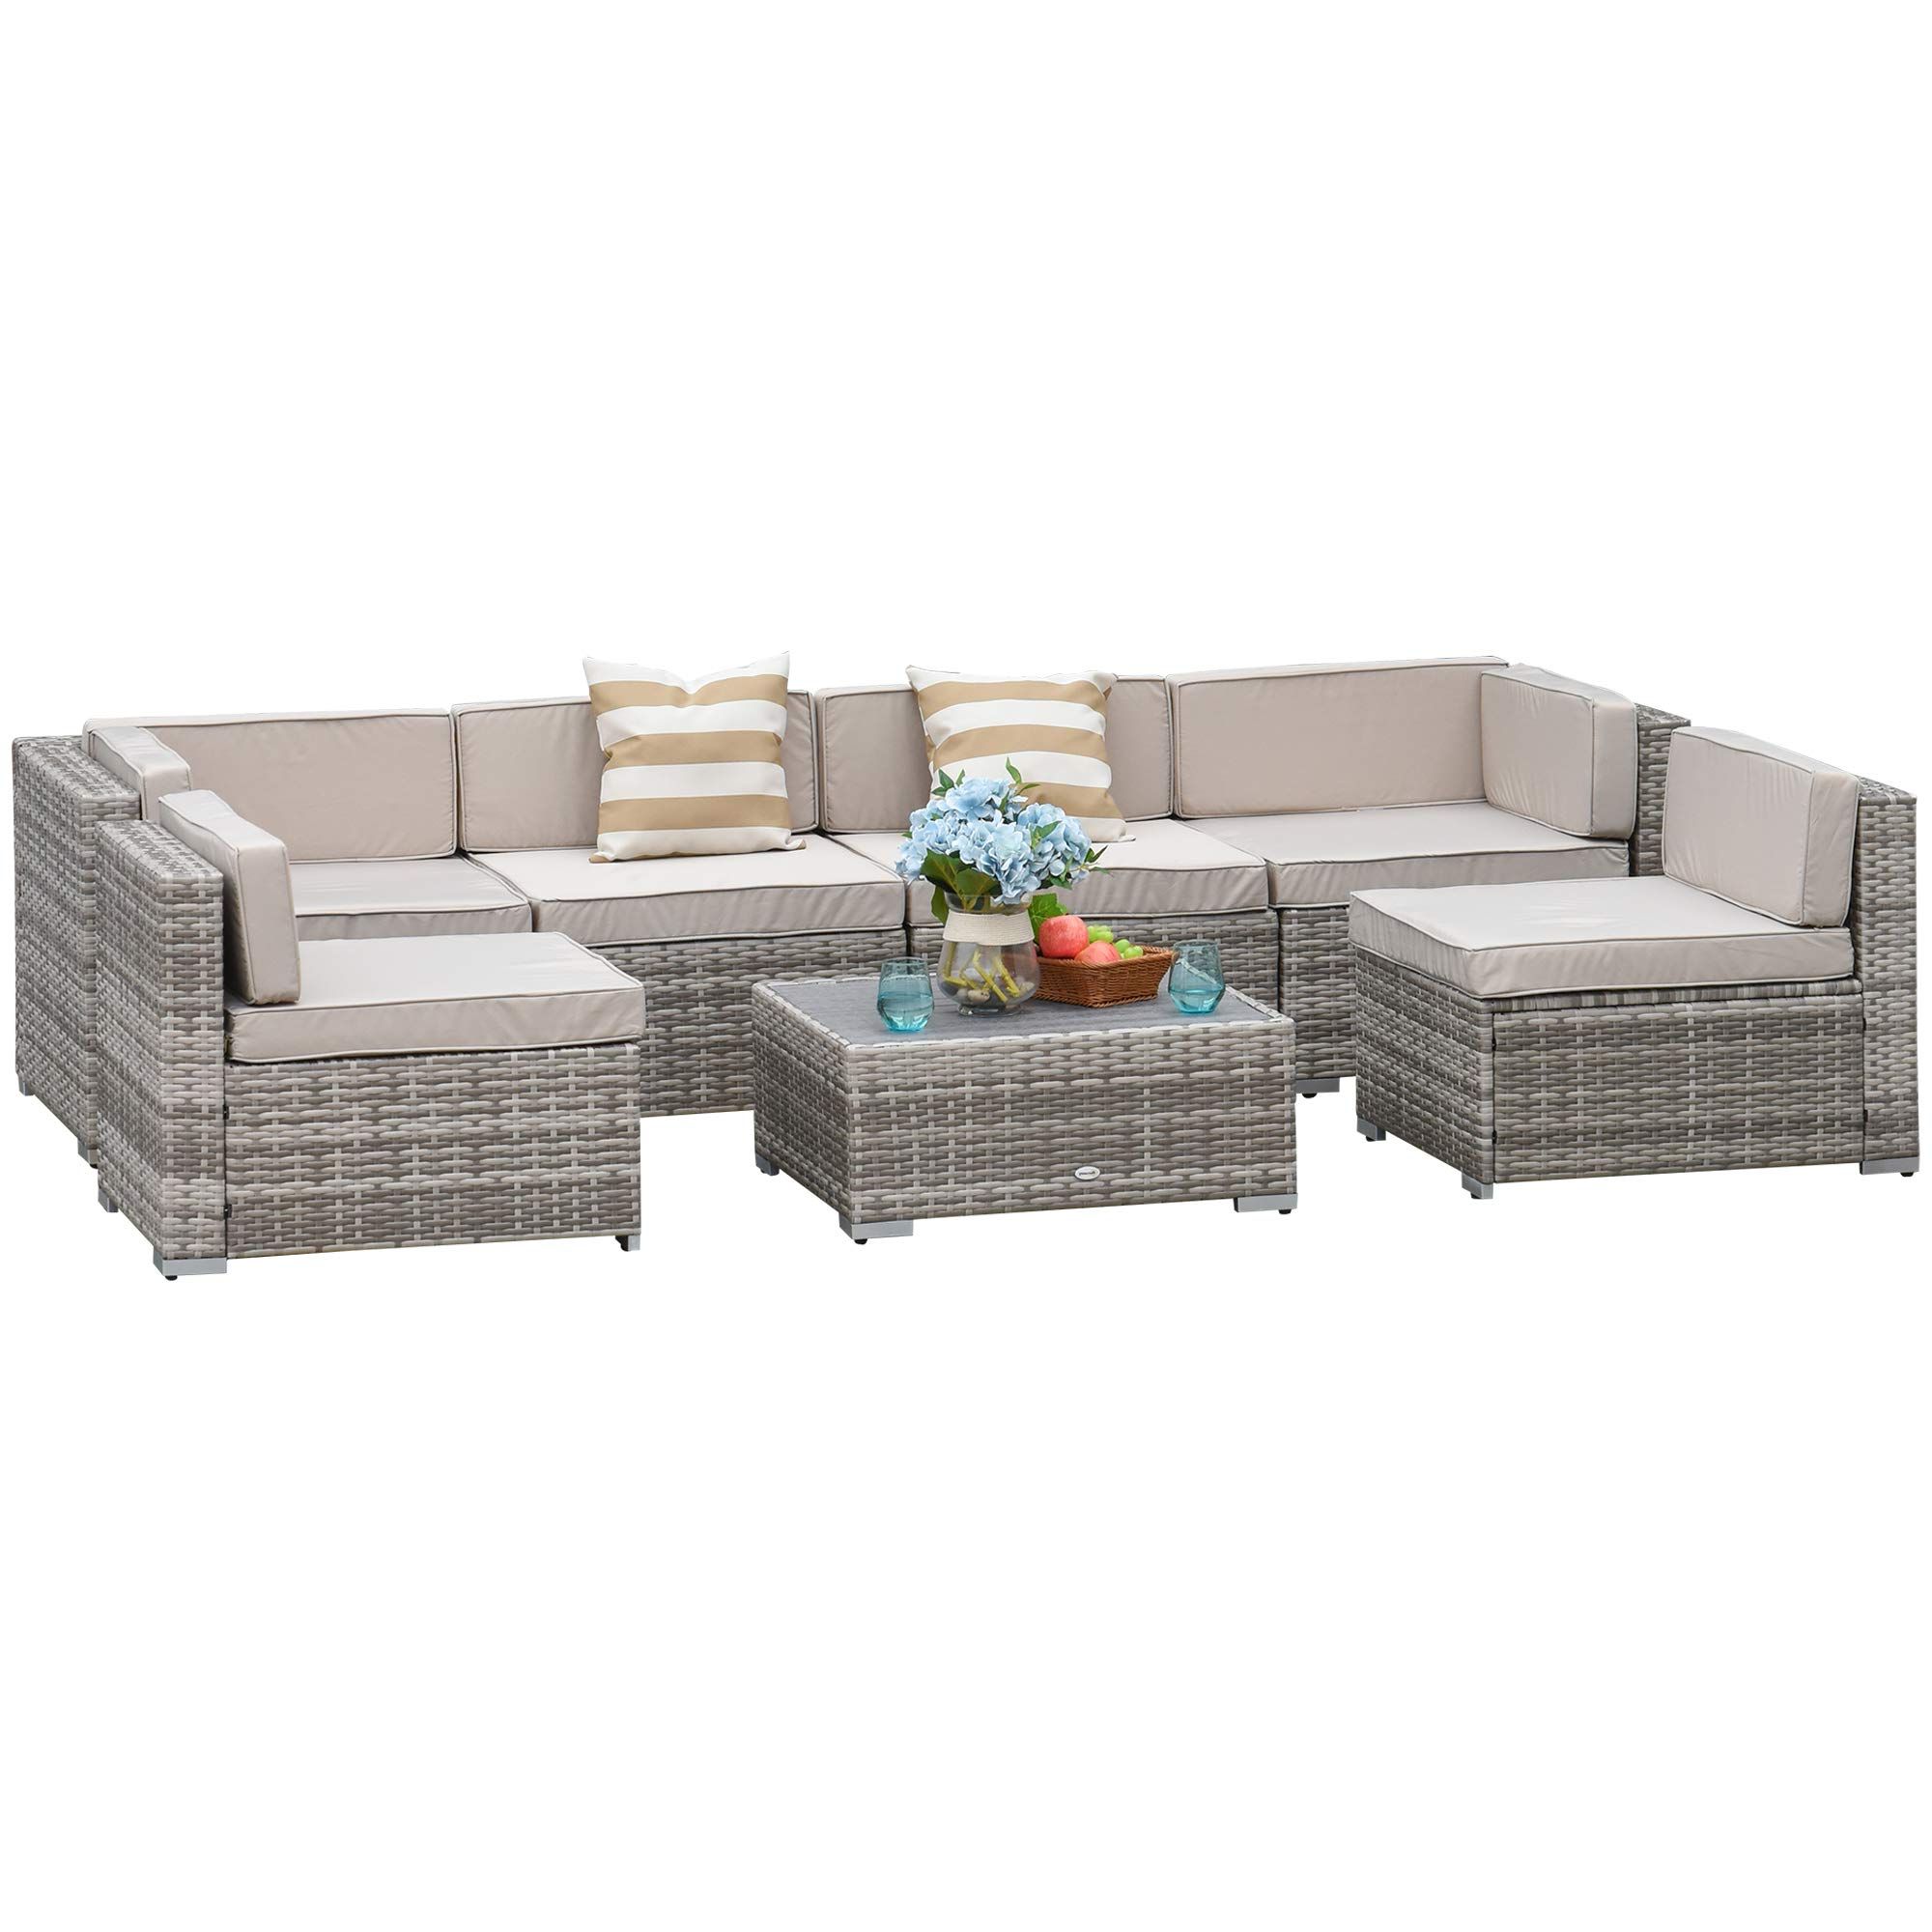 Amazon: Outsunny 7 Piece Outdoor Patio Furniture Set, Pe Rattan Wicker Sectional  Sofa Patio Conversation Sets With Couch Cushions, Throw Pillows And Slat  Coffee Table, Stripe, Beige : Patio, Lawn & Garden With Well Liked Outdoor Couch Cushions, Throw Pillows And Slat Coffee Table (Photo 4 of 15)